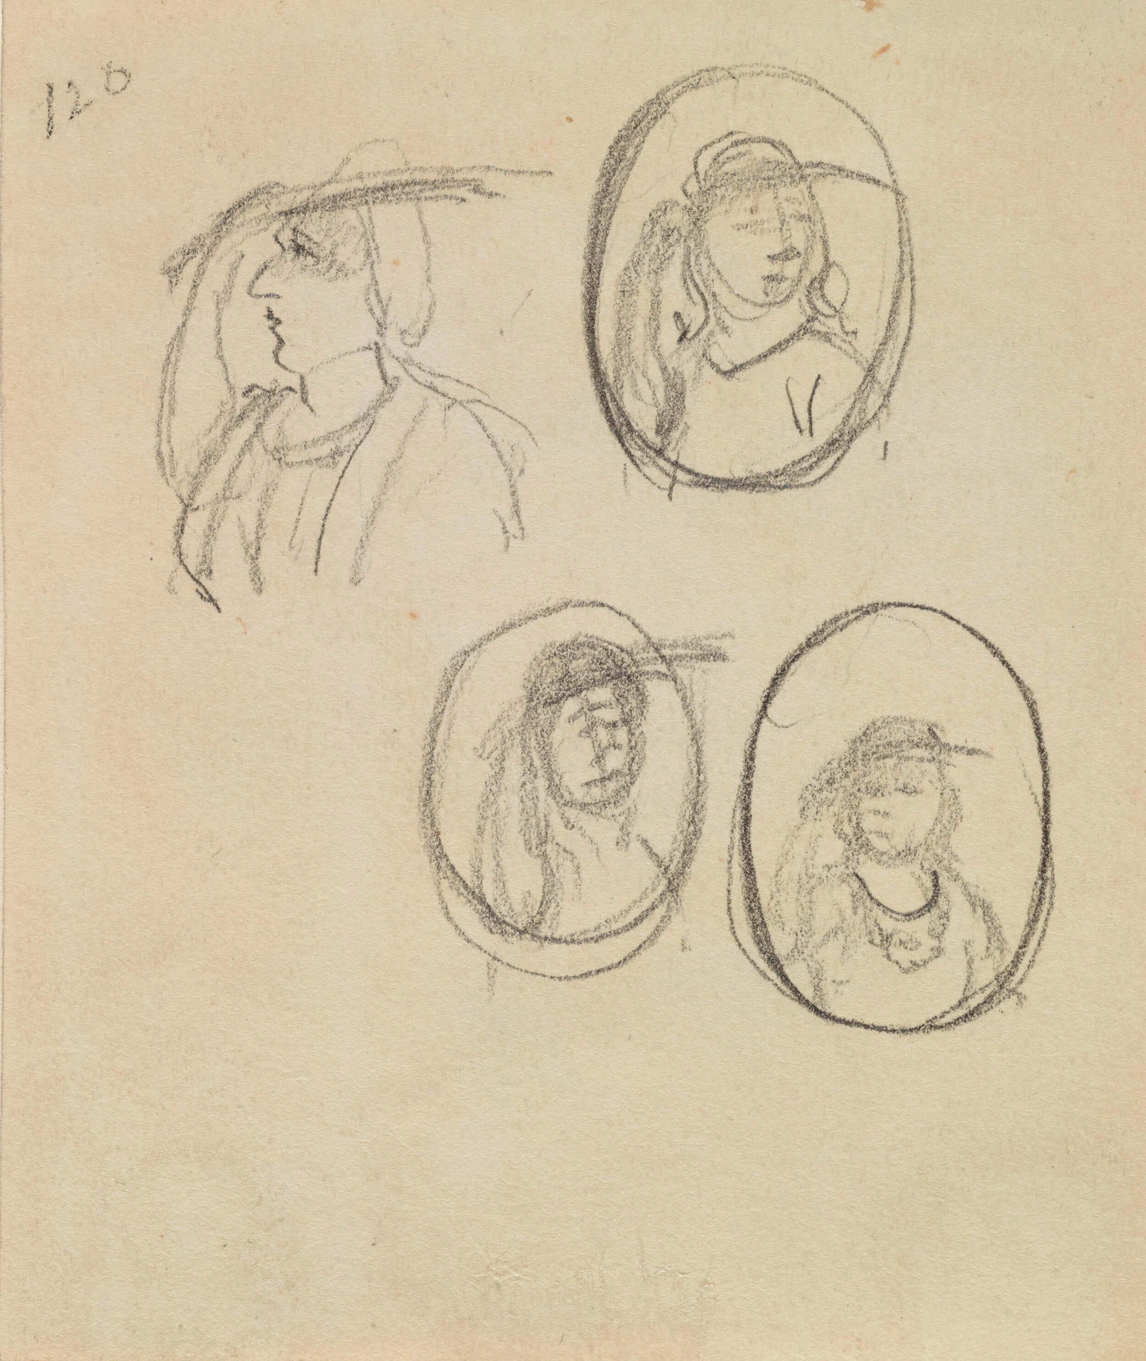 Art Canada Institute, Paul Kane, Compositional Studies of Four Figures with Fans, c. 1846–48